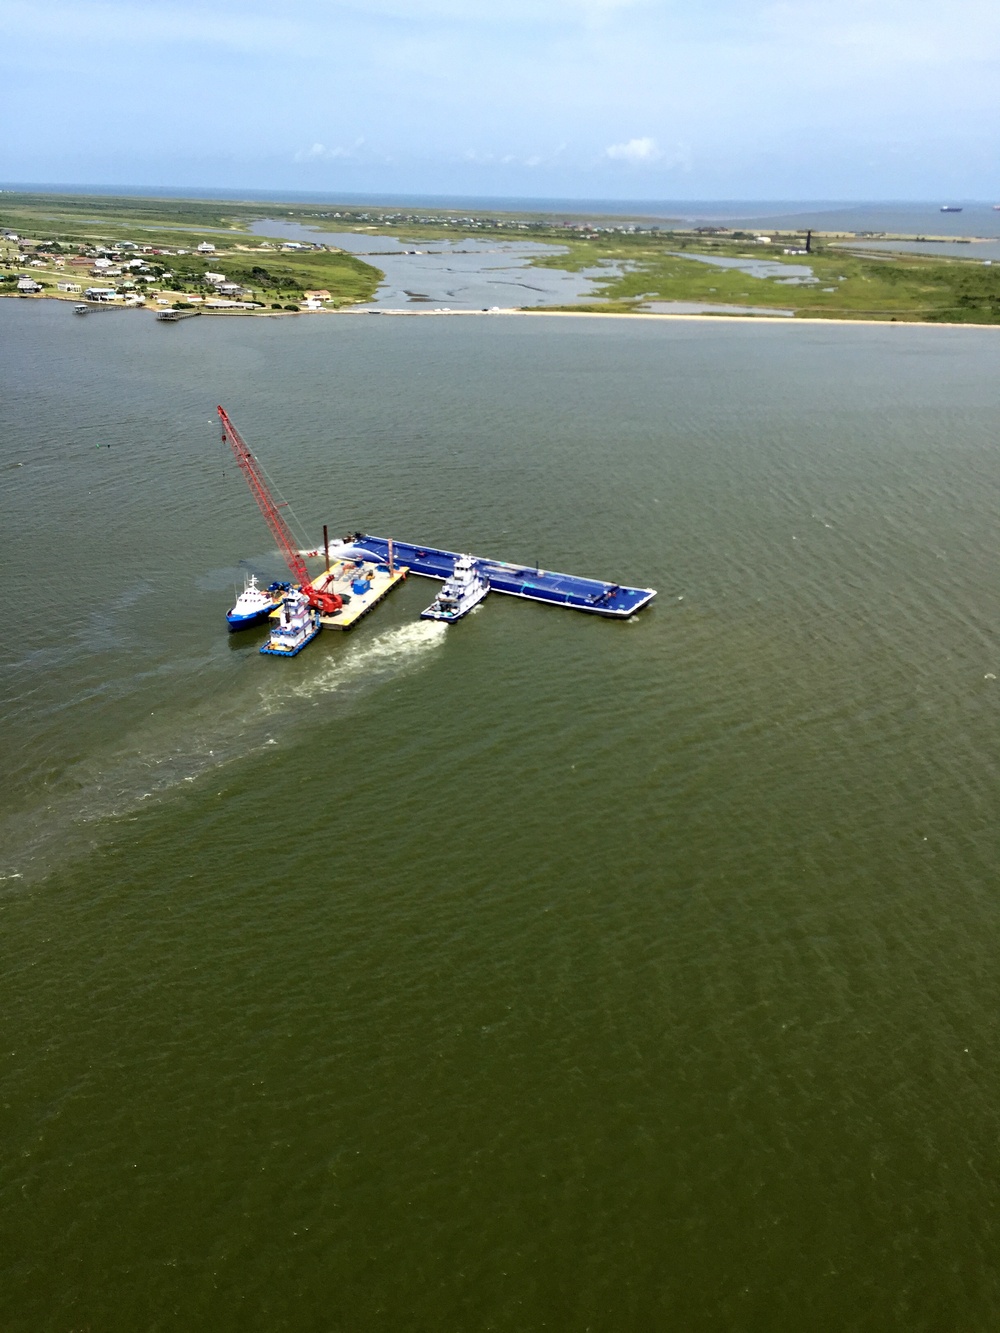 Responders prepare to move damaged barge after collision in Intracoastal Waterway